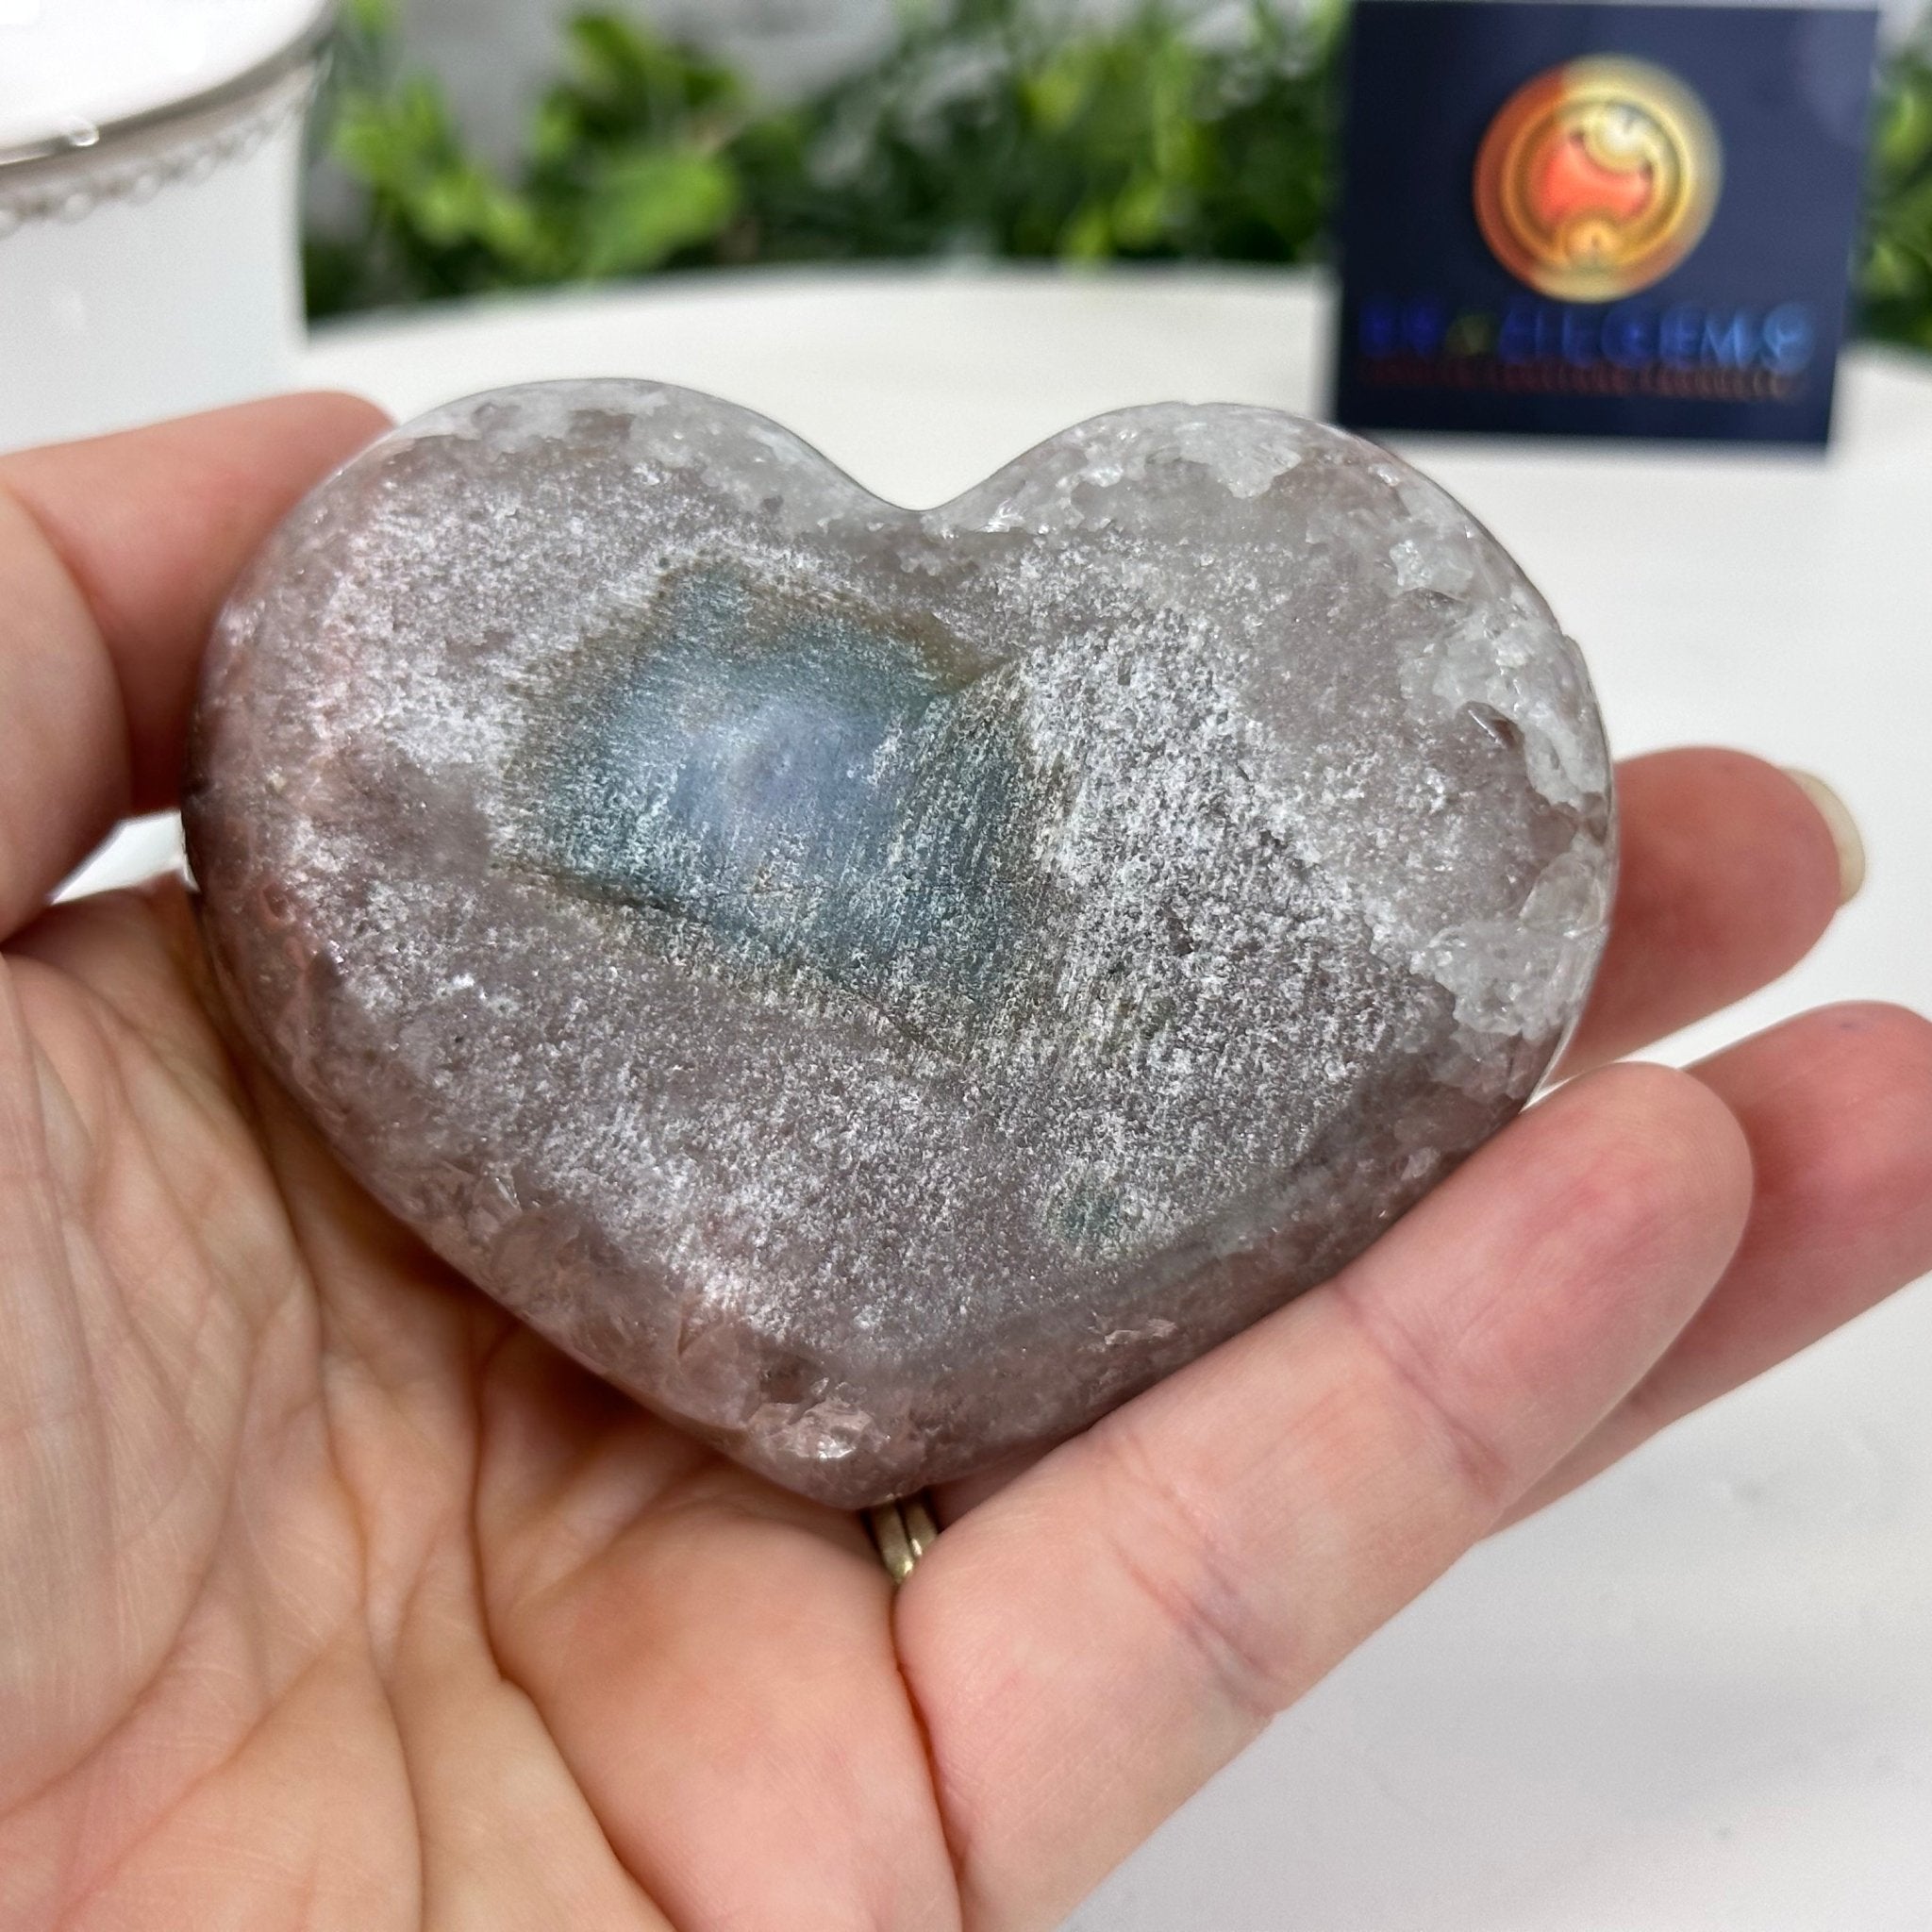 Extra Quality Pink Amethyst Heart Geode on an Acrylic Stand, 0.57 lbs & 2.1" Tall #5462-0042 by Brazil Gems - Brazil GemsBrazil GemsExtra Quality Pink Amethyst Heart Geode on an Acrylic Stand, 0.57 lbs & 2.1" Tall #5462-0042 by Brazil GemsHearts5462-0042